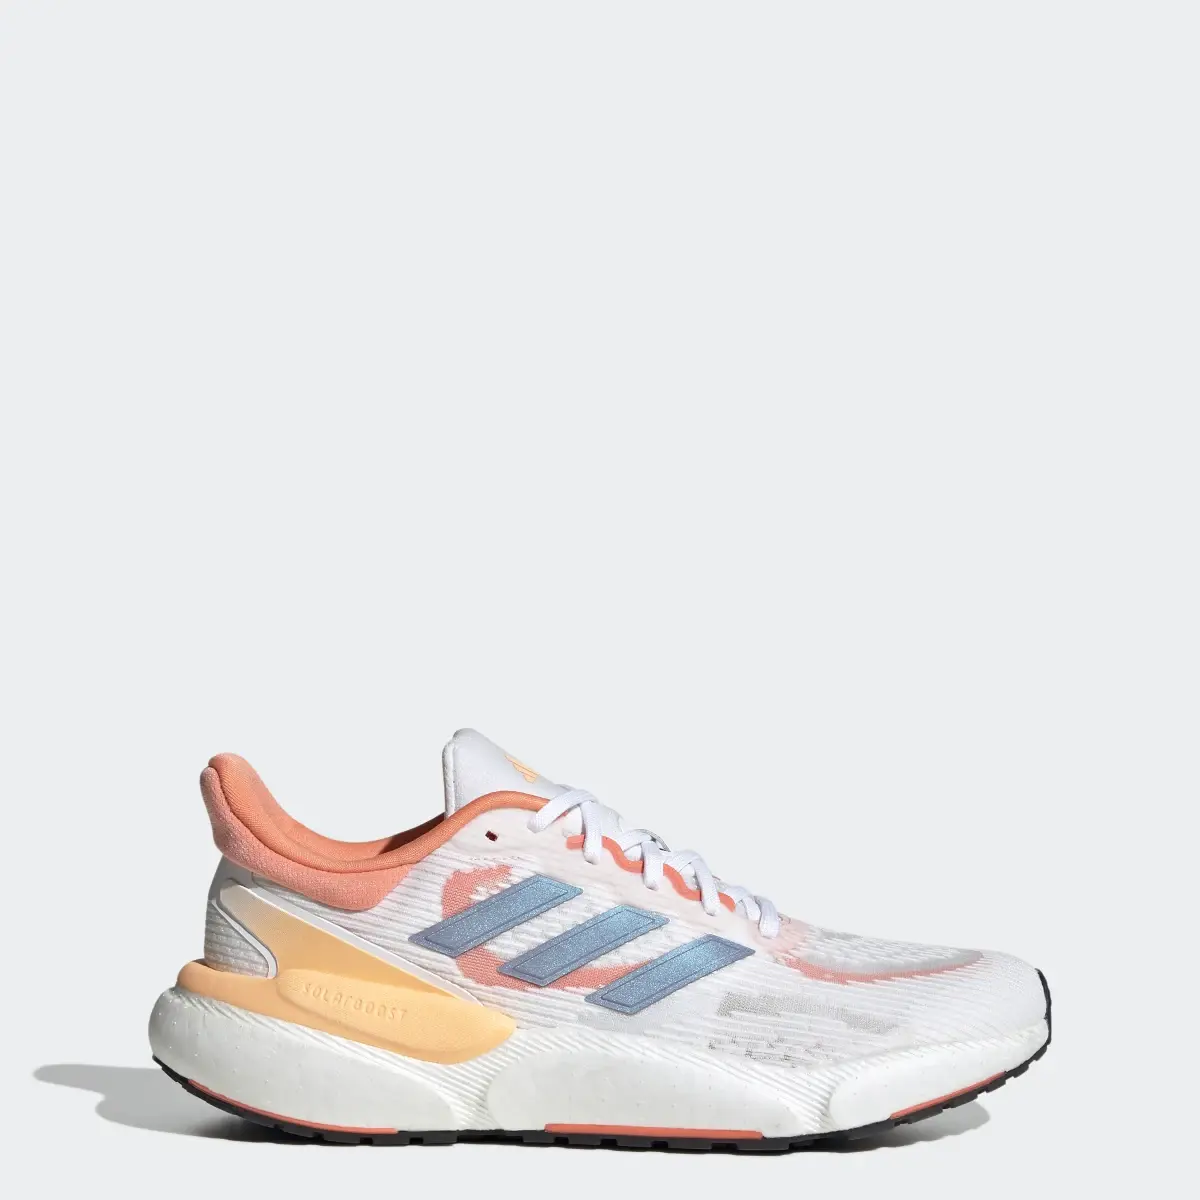 Adidas Solarboost 5 Shoes. 1